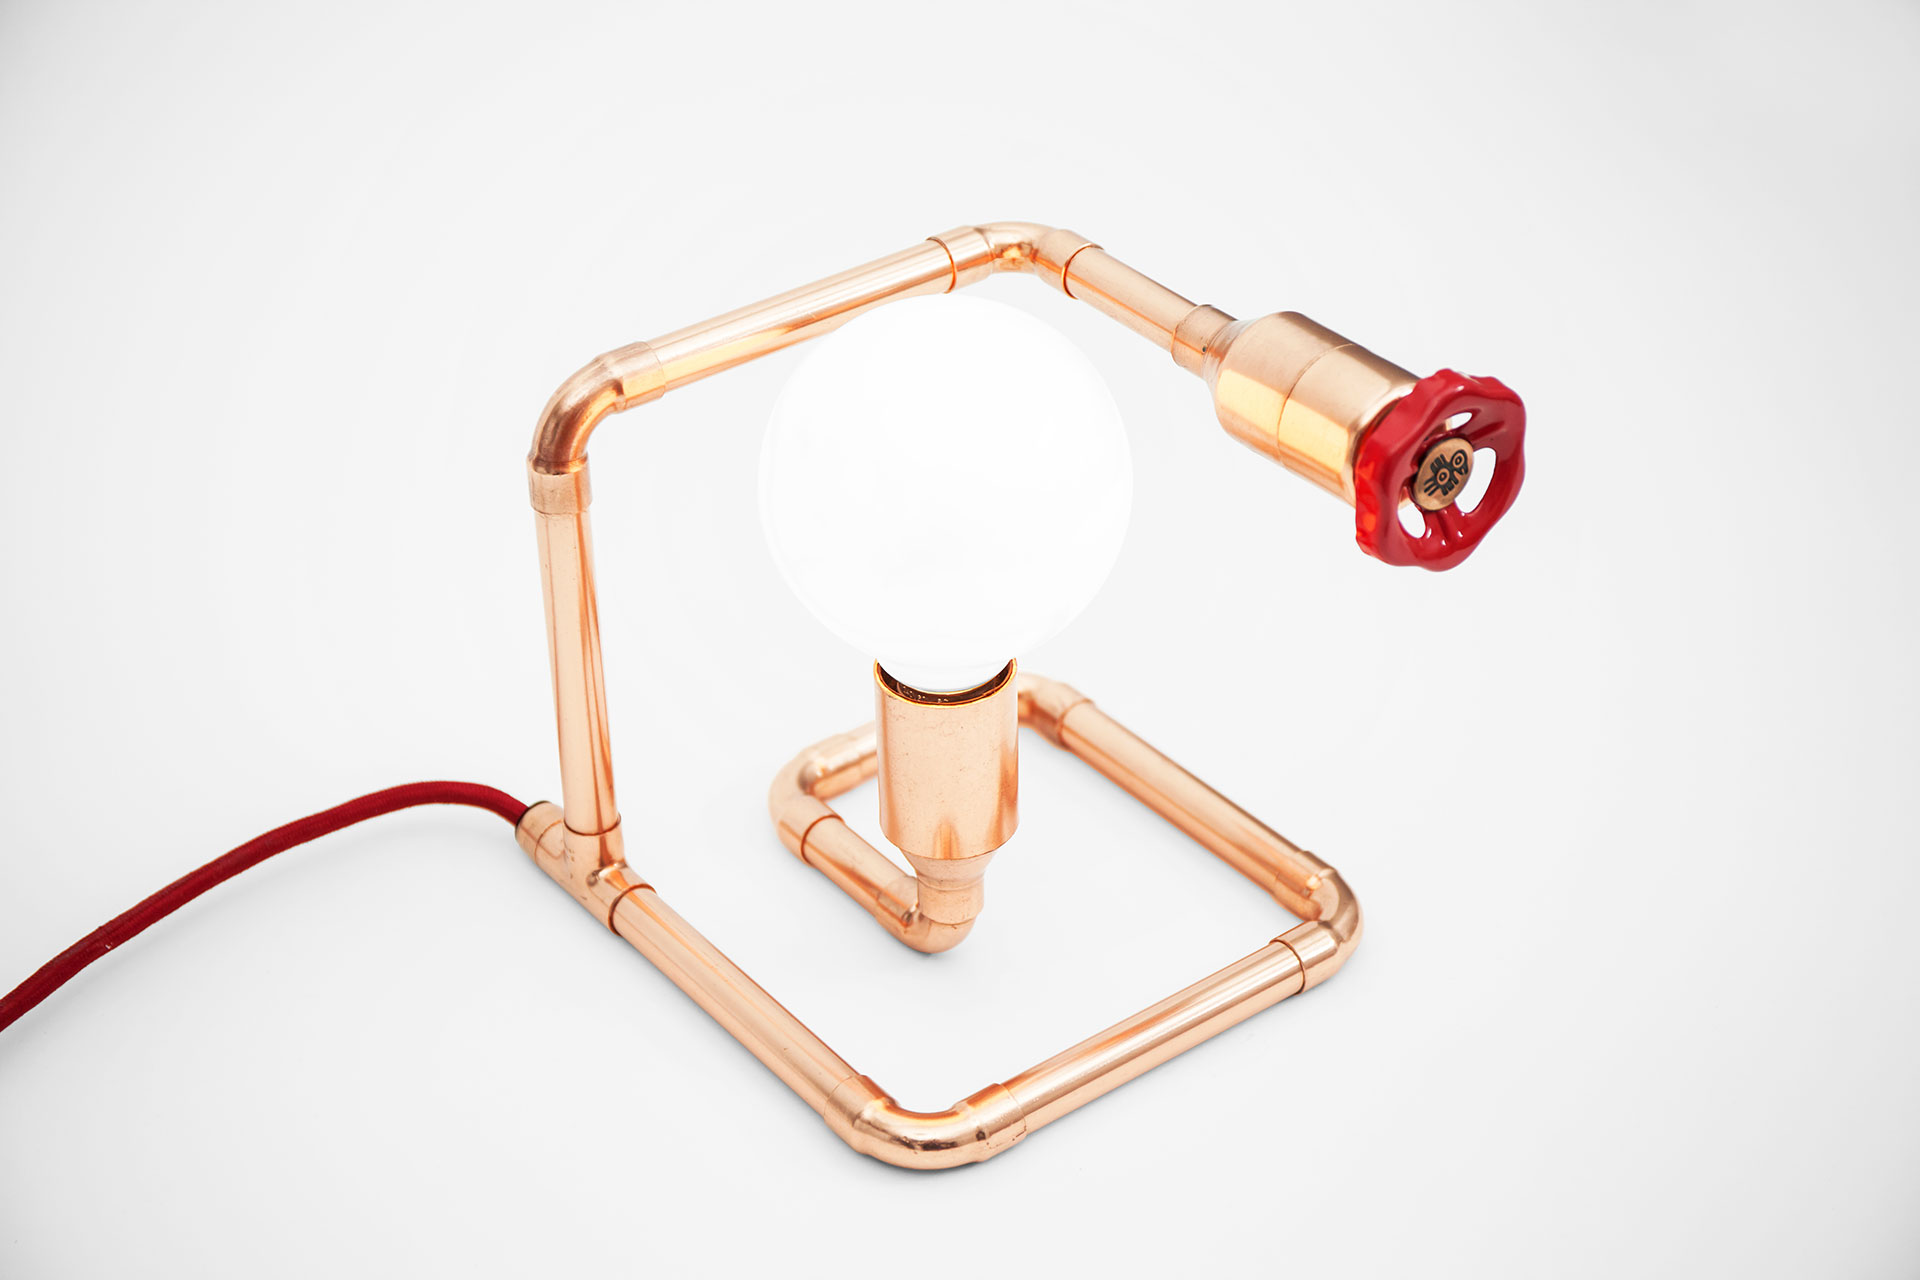 Gadget table lamp made of copper pipes with funny knob dimmer inspired by industrial design